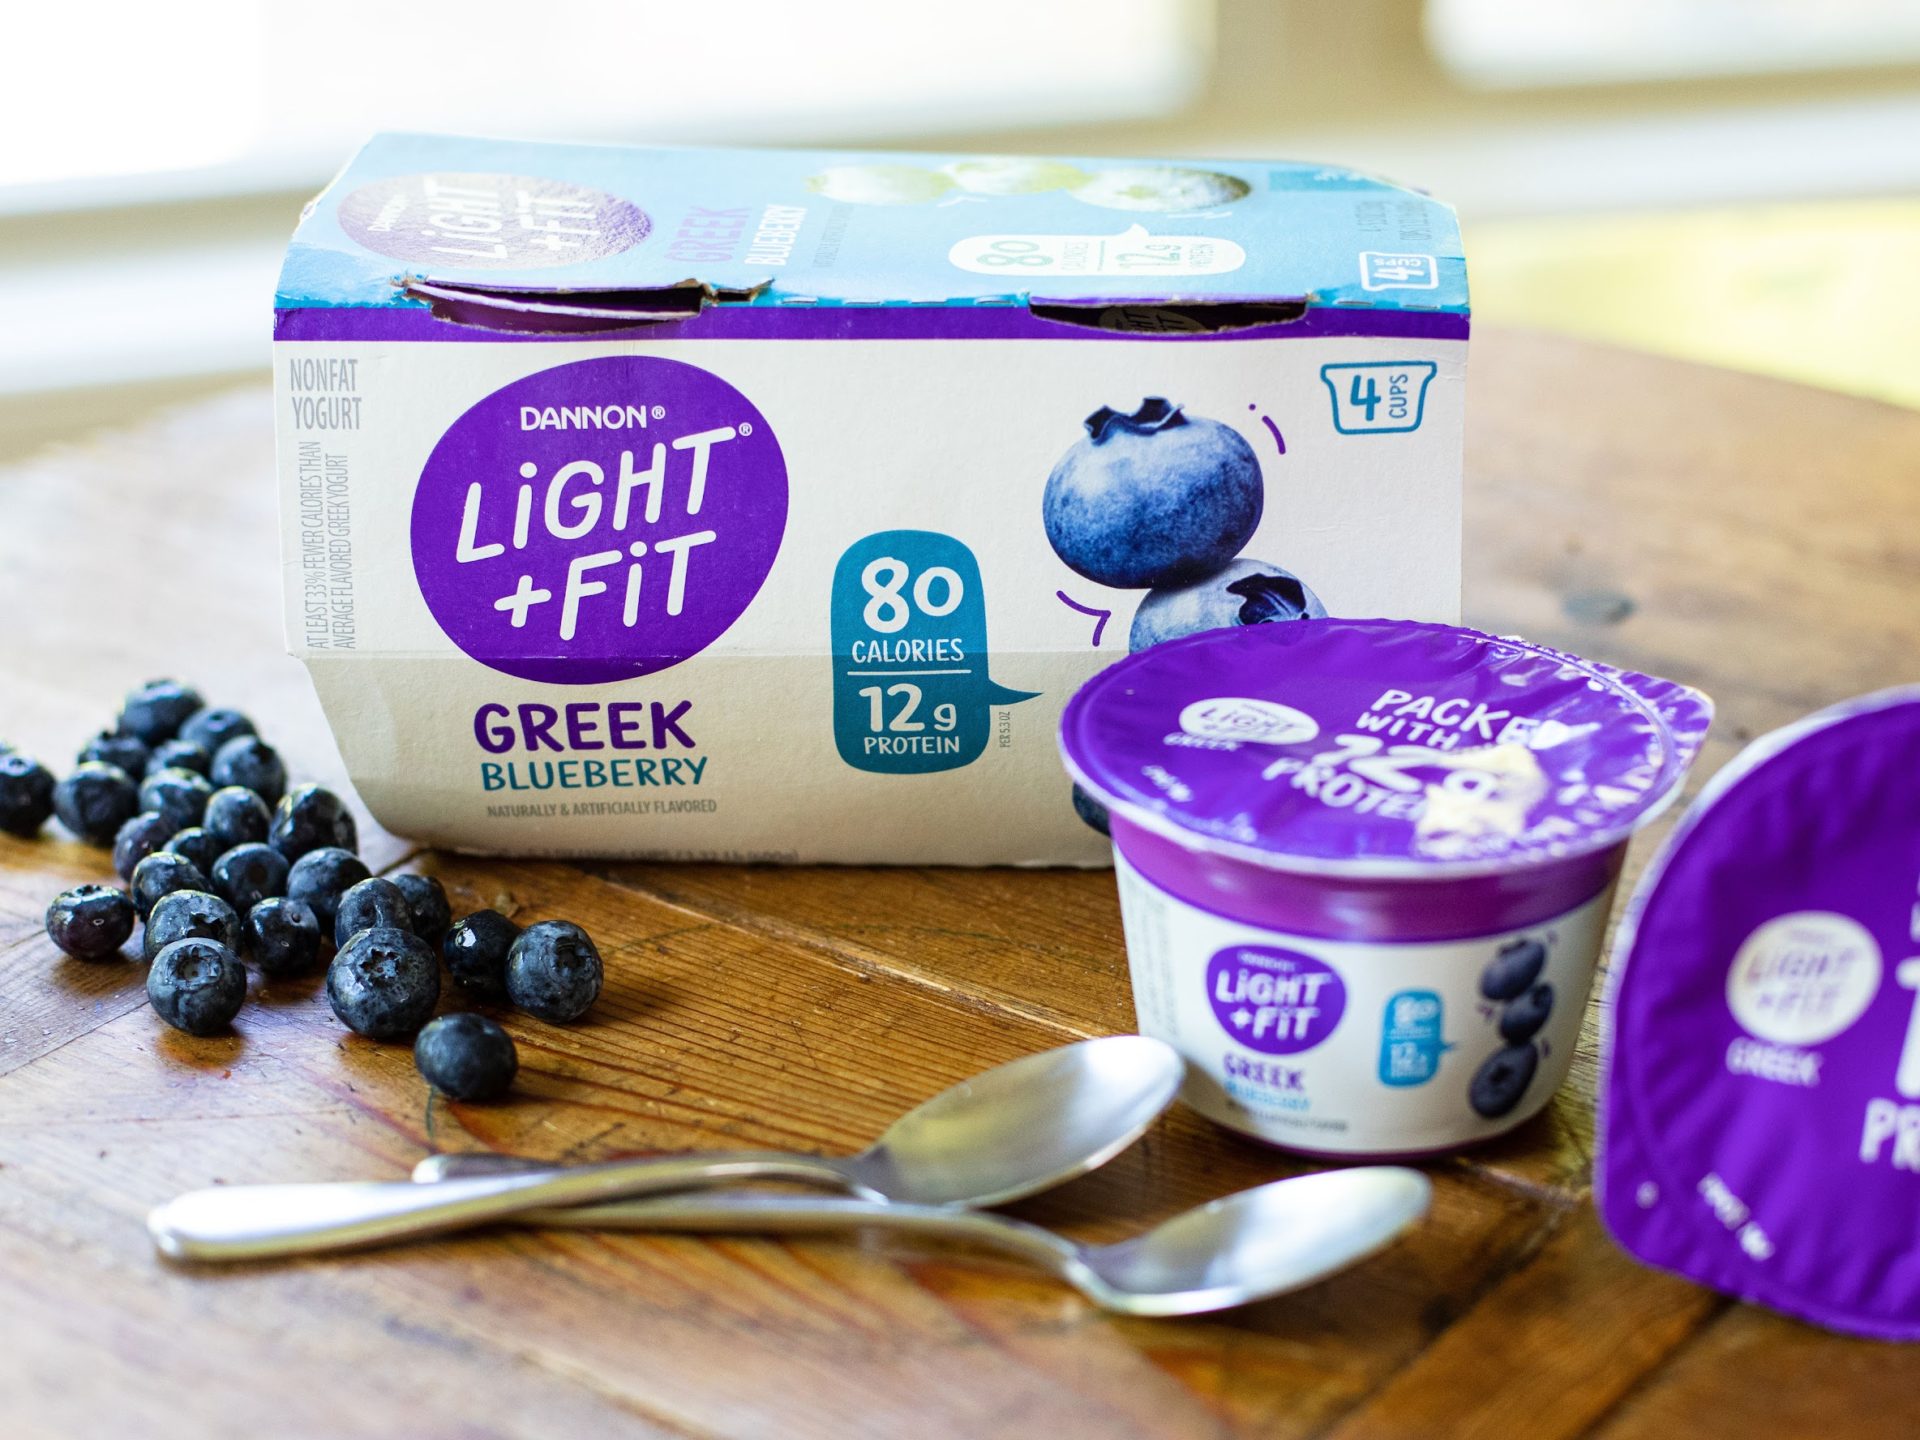 Dannon Oikos Yogurt 4-Packs As Low As $1.49 At Kroger (Plus Cheap Light+Fit Or Two Good)